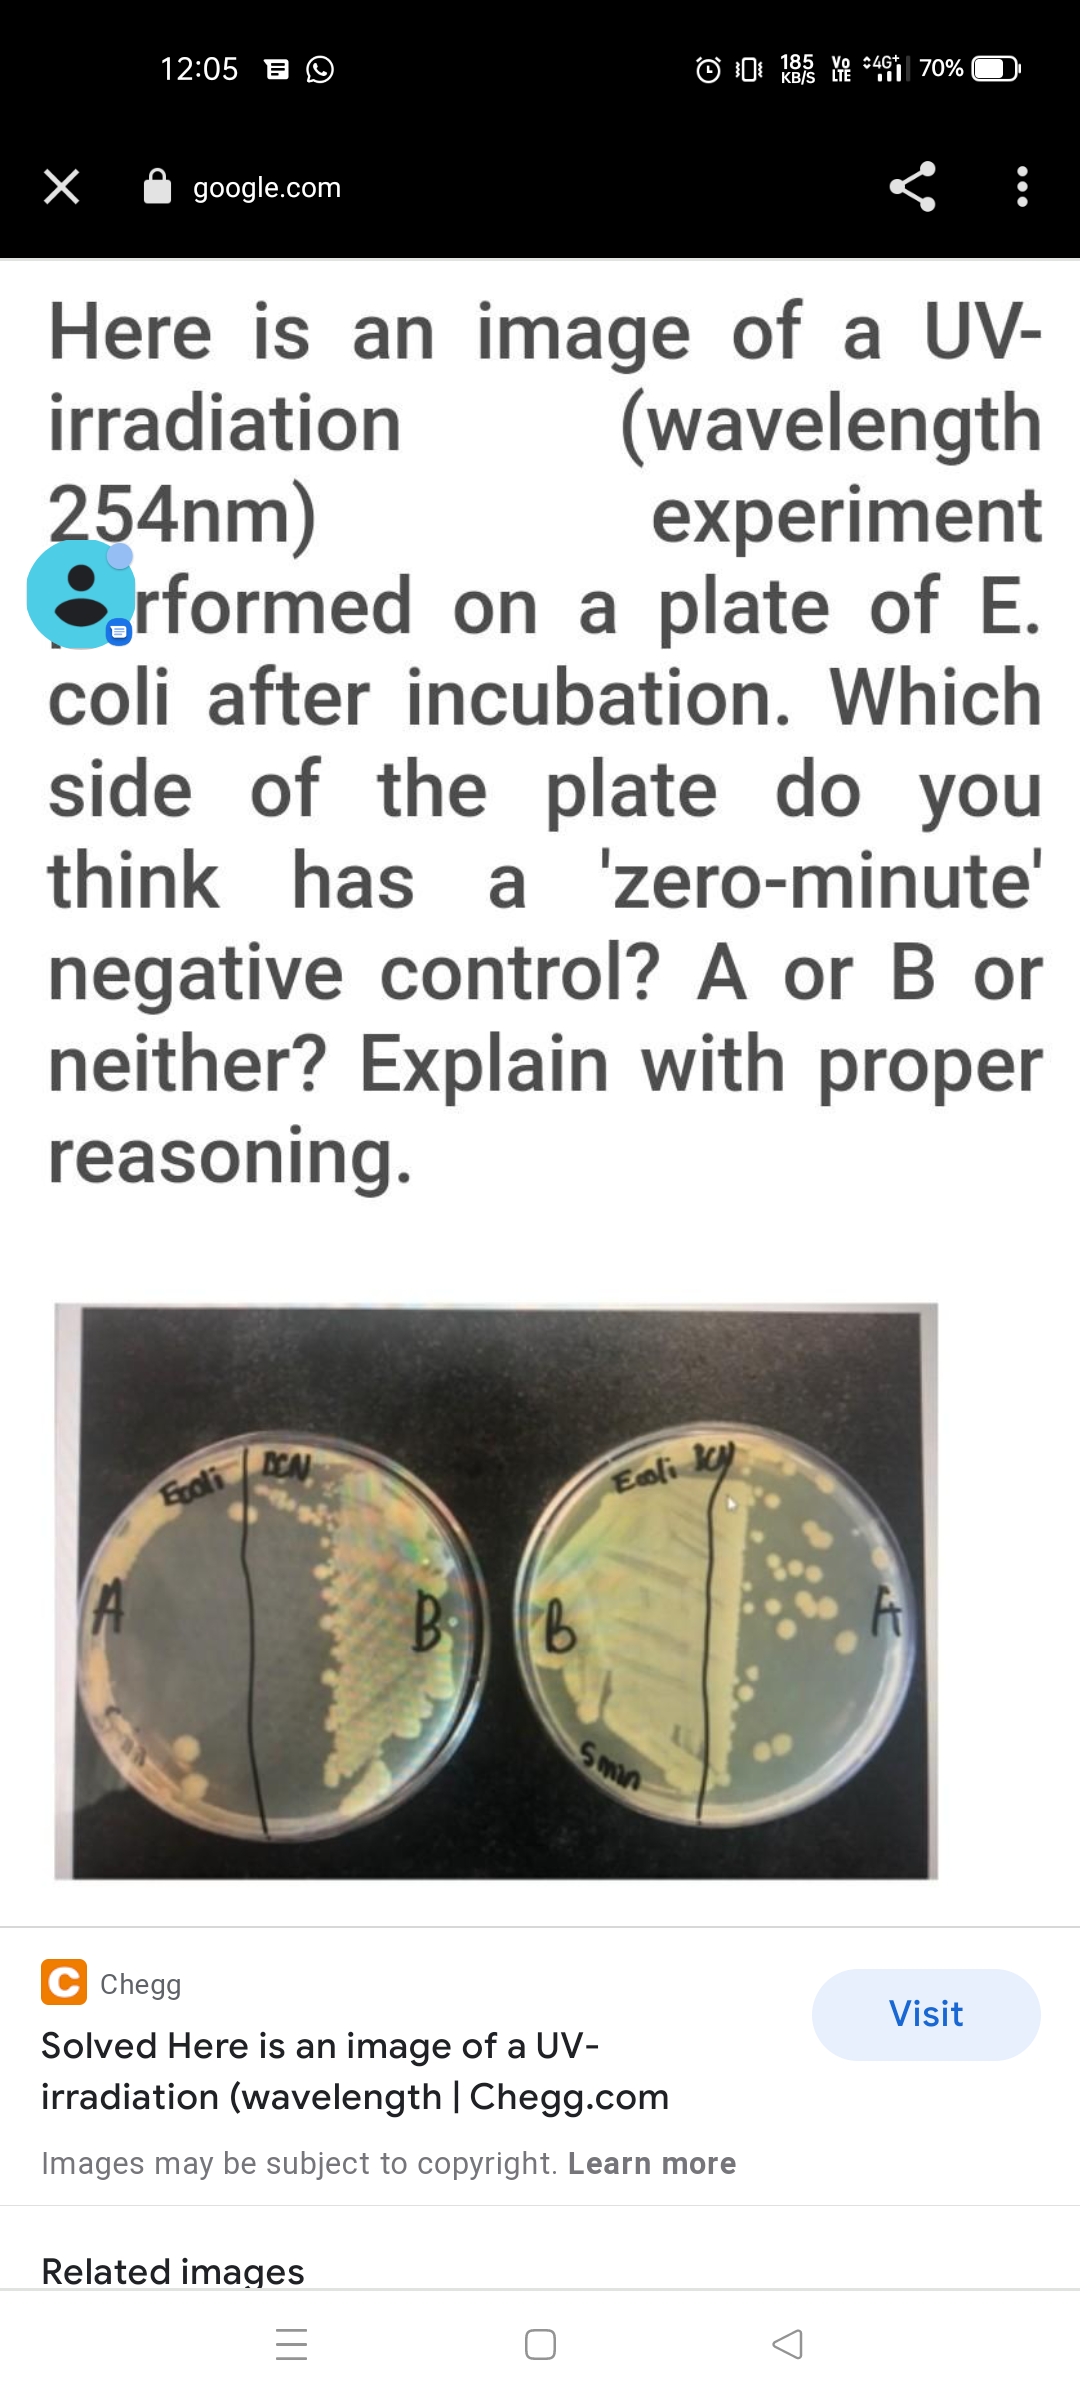 12:05 B O
185
google.com
Here is an image of a UV-
irradiation
(wavelength
experiment
254nm)
rformed on a plate of E.
coli after incubation. Which
side of the plate do you
think has a 'zero-minute'
negative control? A or B or
neither? Explain with proper
reasoning.
DEN
Exoli
Eoli ky
Chegg
Visit
Solved Here is an image of a UV-
irradiation (wavelength | Chegg.com
Images may be subject to copyright. Learn more
Related images
